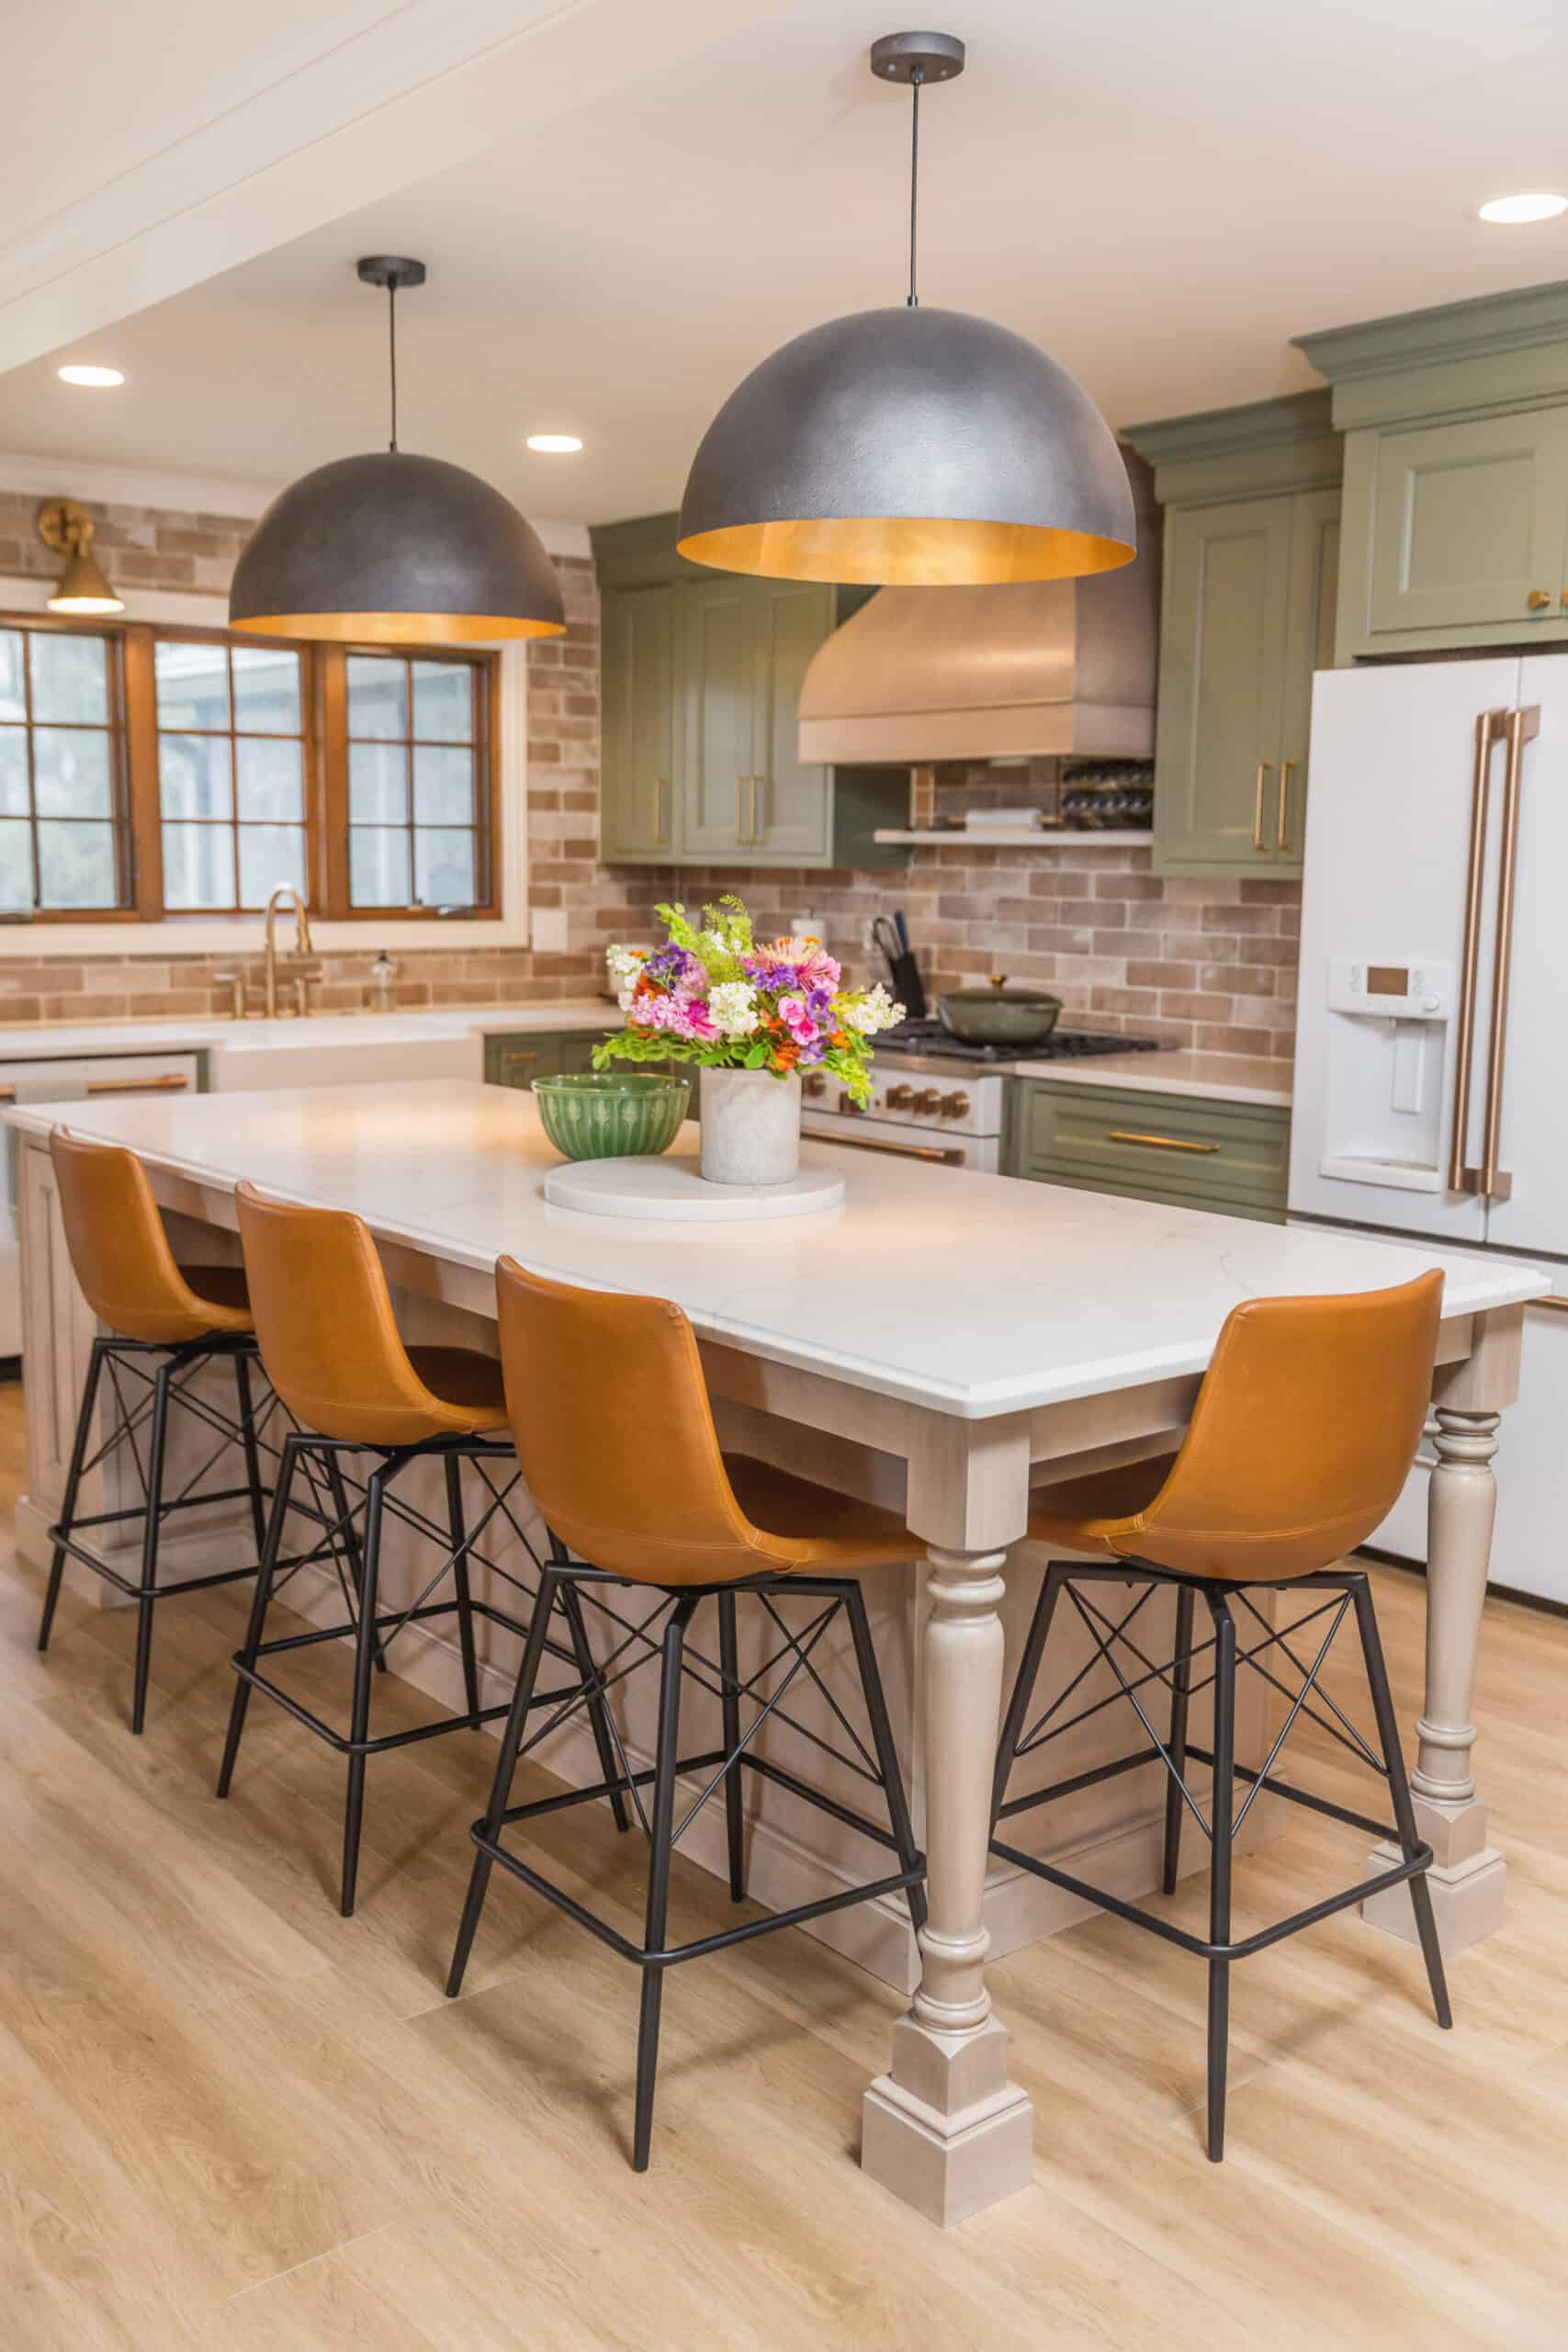 Nicholas Design Build | A modern kitchen with a central island featuring tan leather stools and pendant lights.